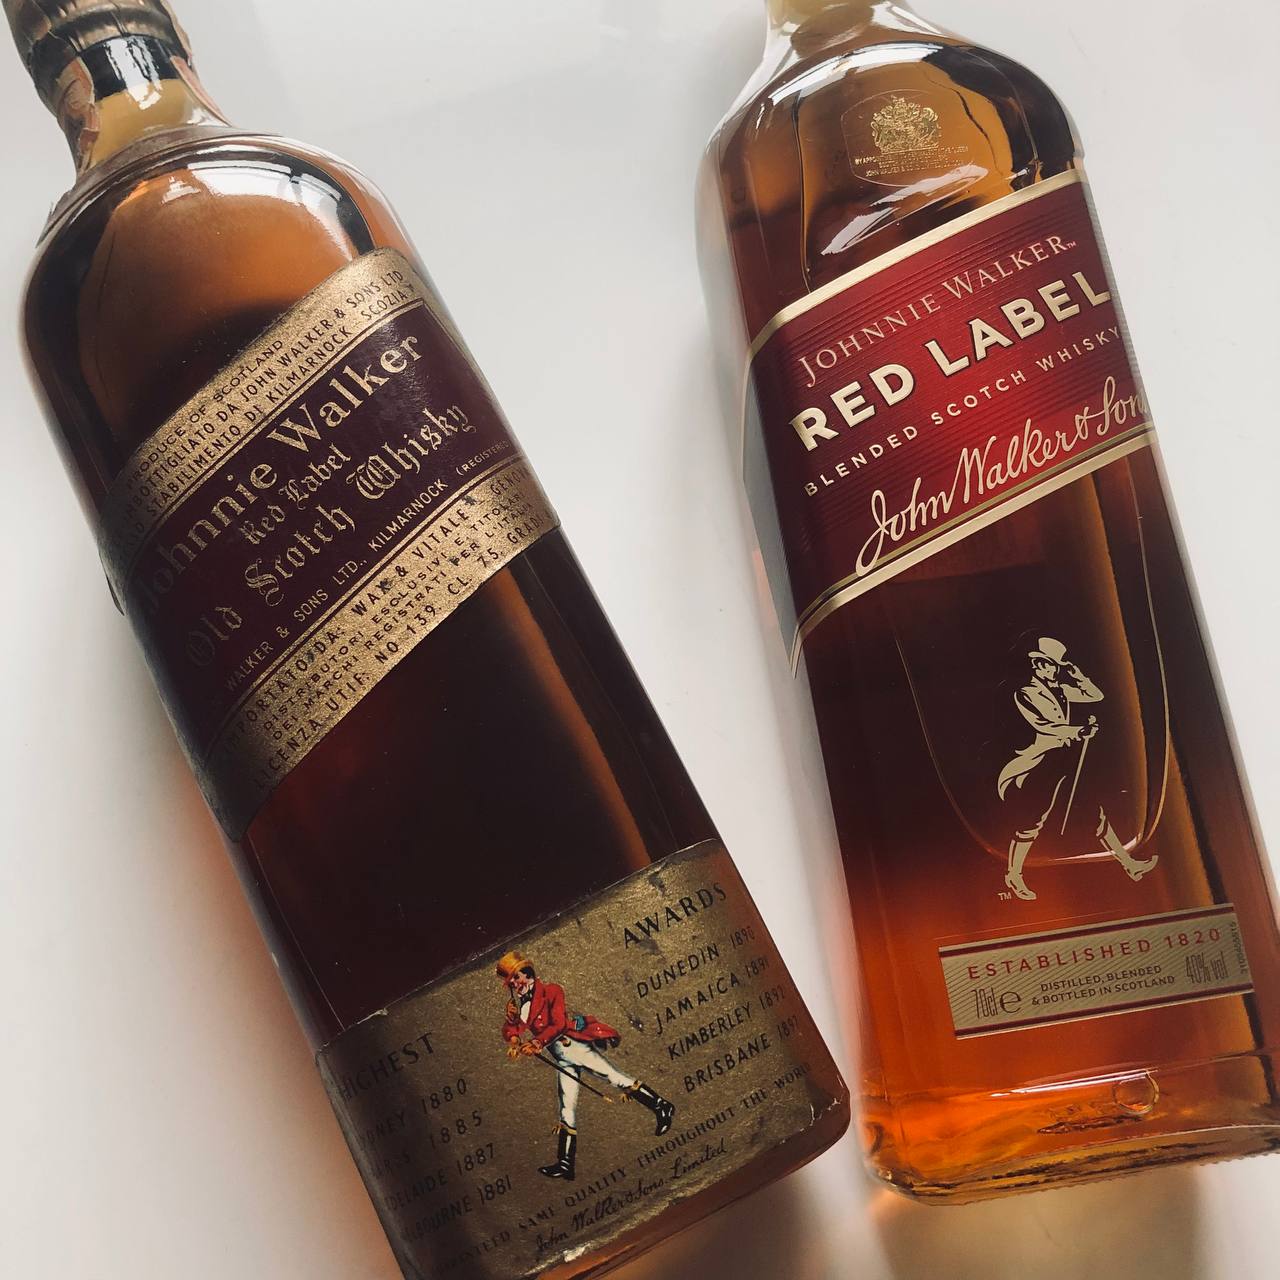 Walker 88 Red Johnnie Old Bamboo and New Label: – Review]